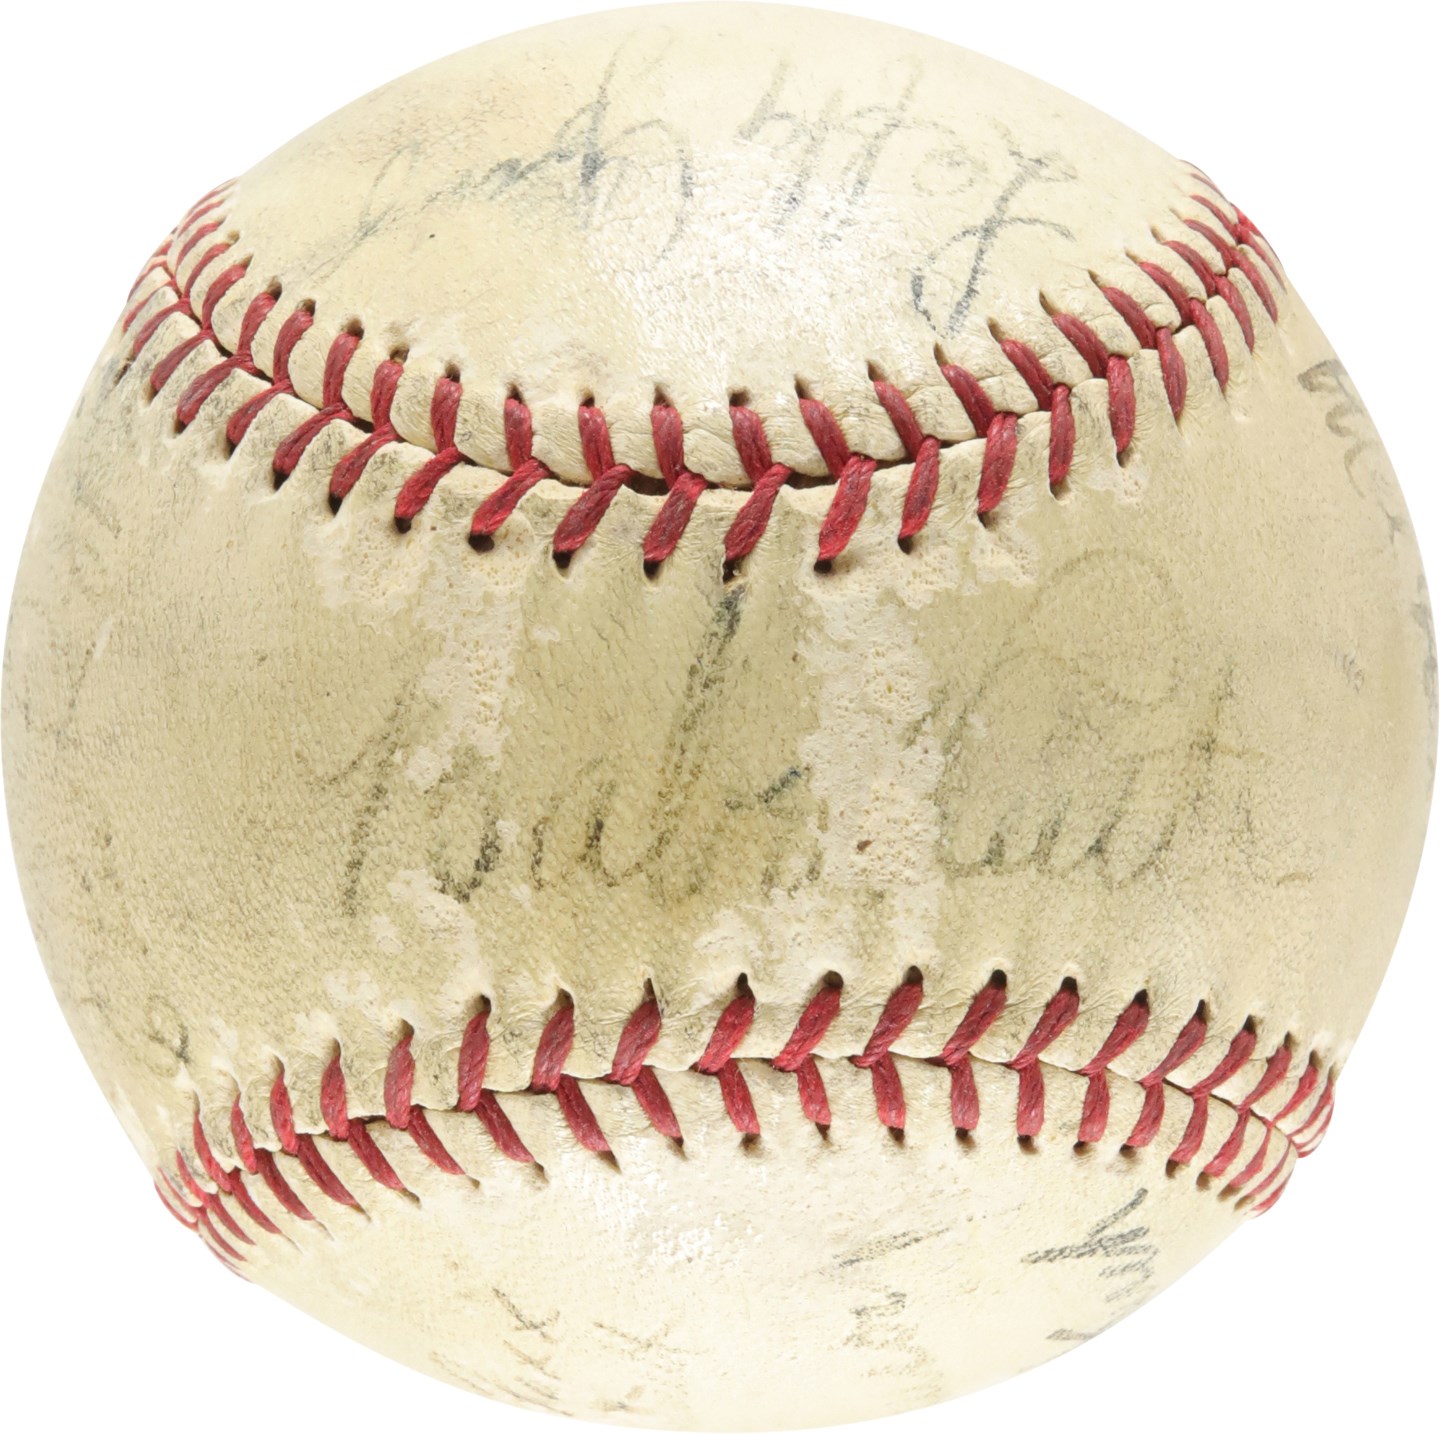 Baseball Autographs - 1934 All-Star Game Signed Baseball  - Hubbell Fans 5 in a Row - with Ruth, Gehrig, Foxx, Simmons, Cronin & W. Johnson (PSA)